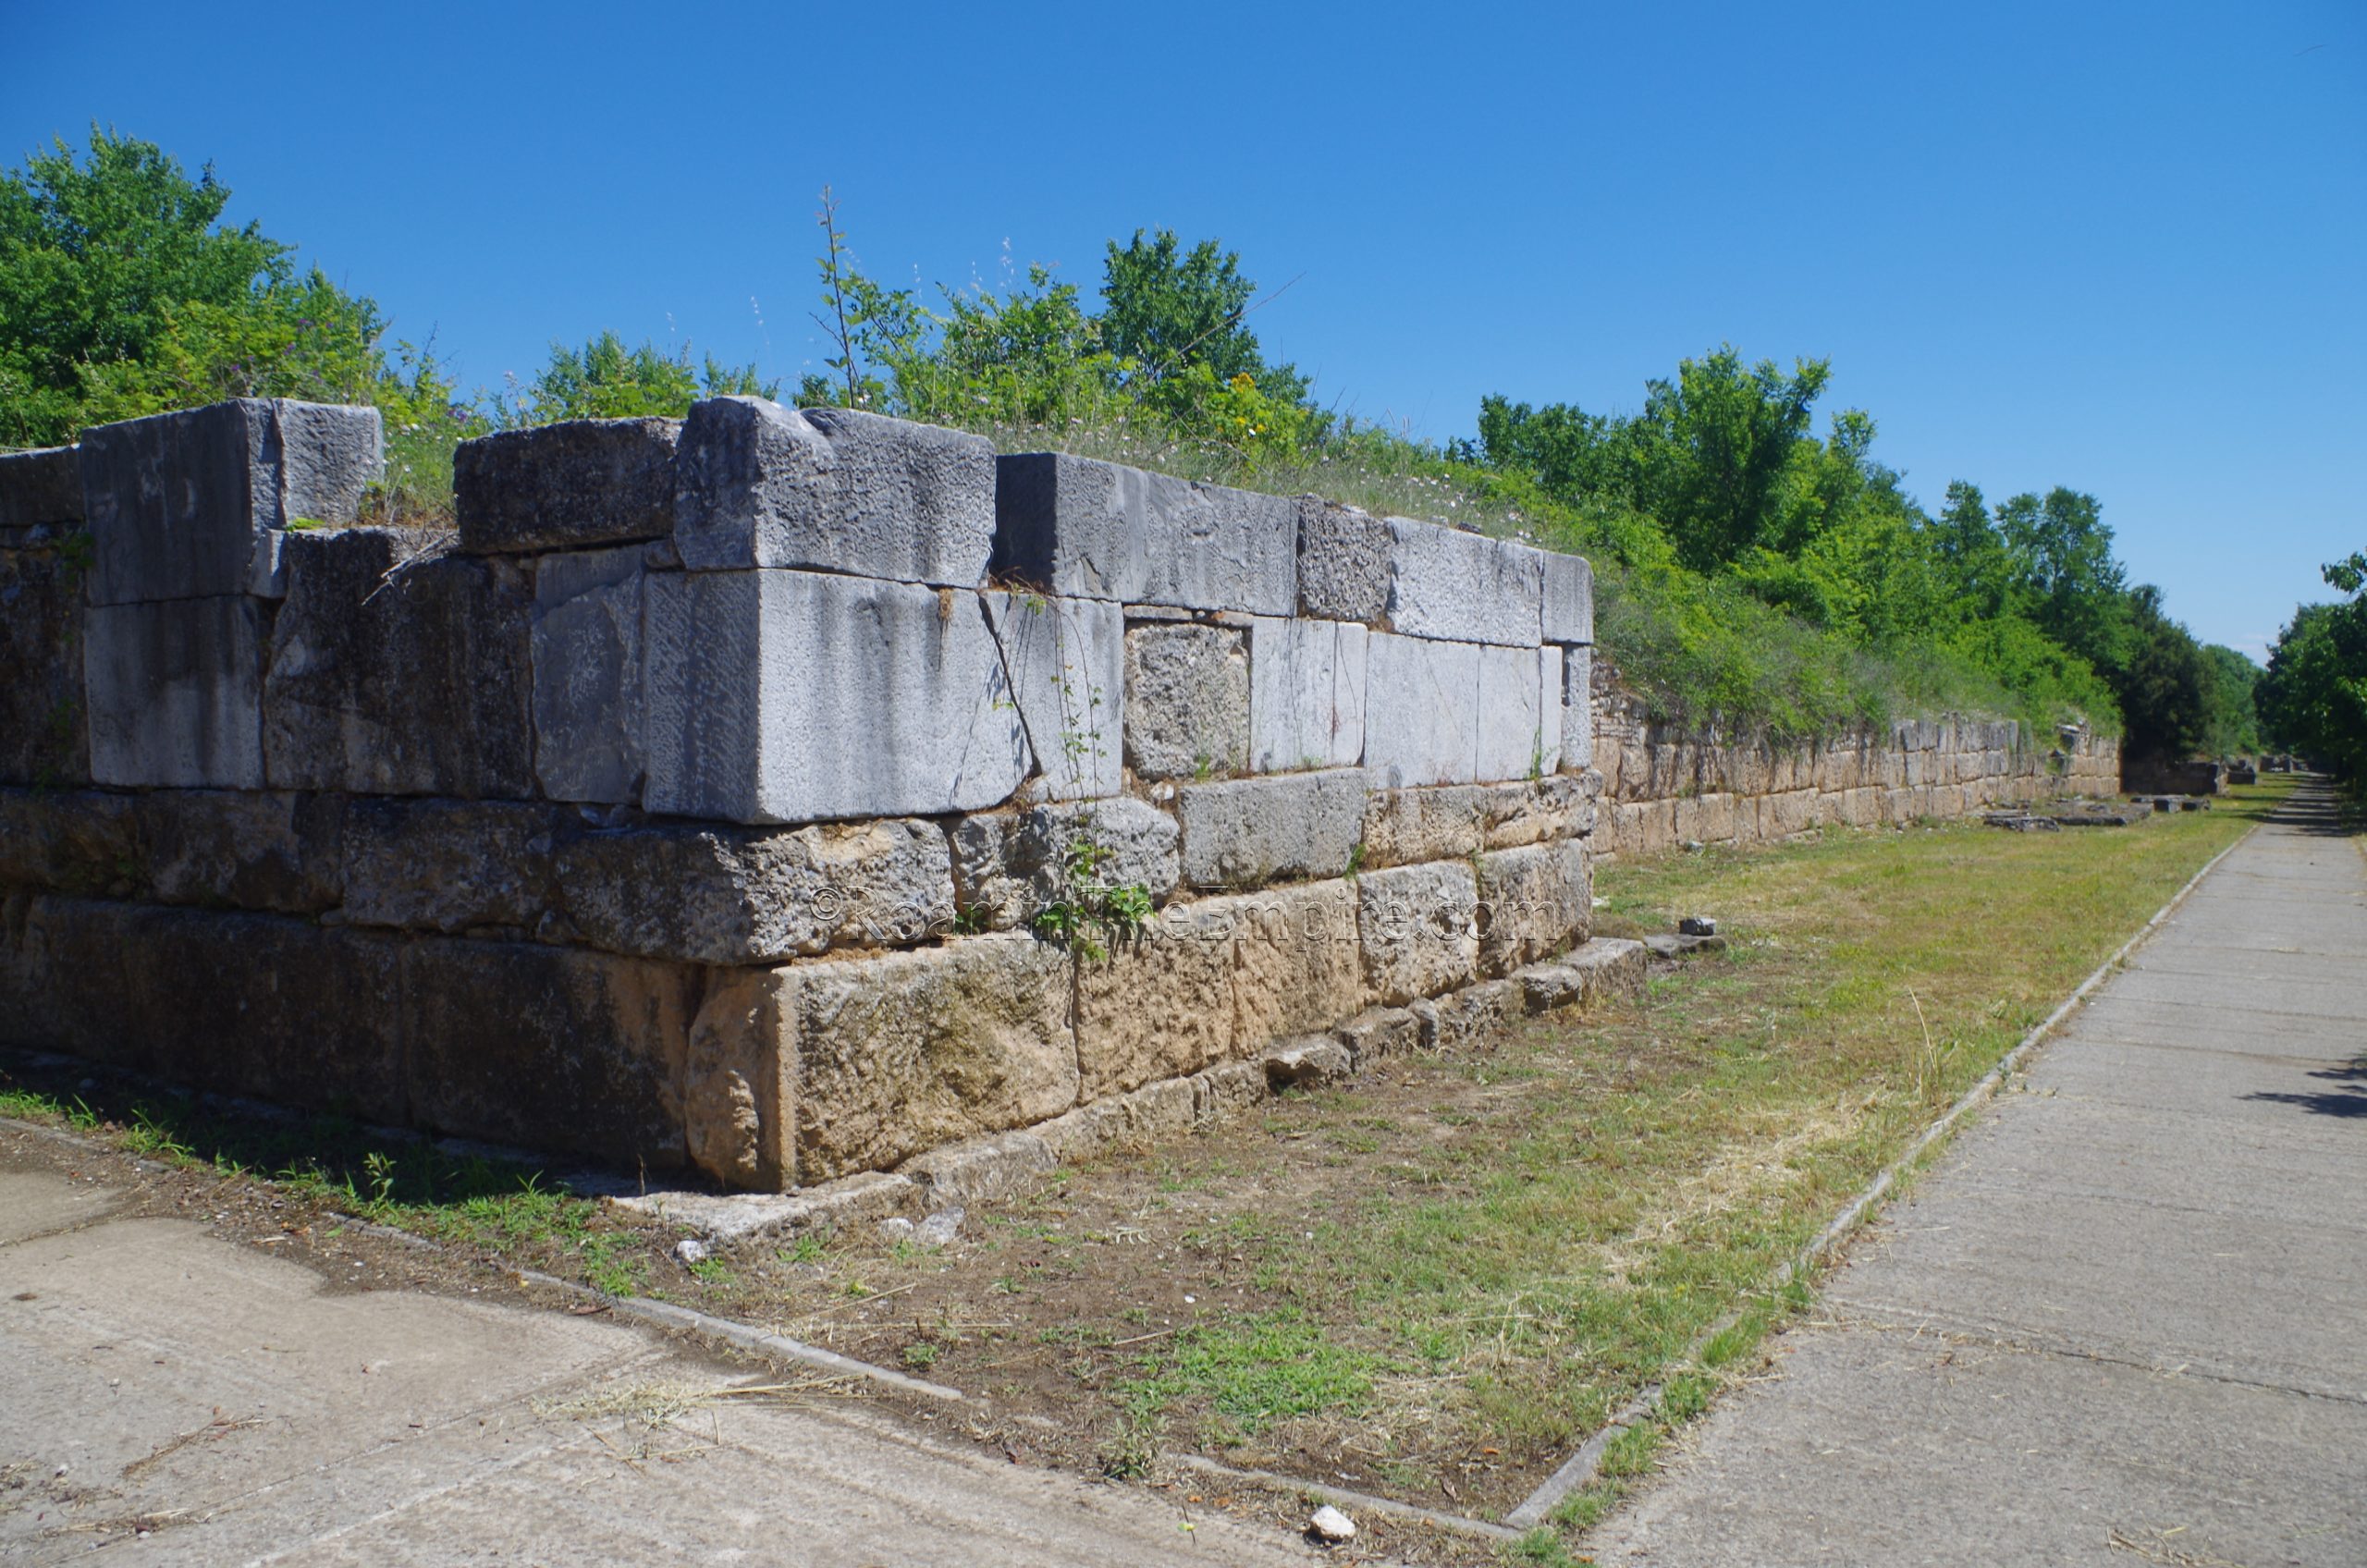 Southwestern tower of the fortification wall of Dium.